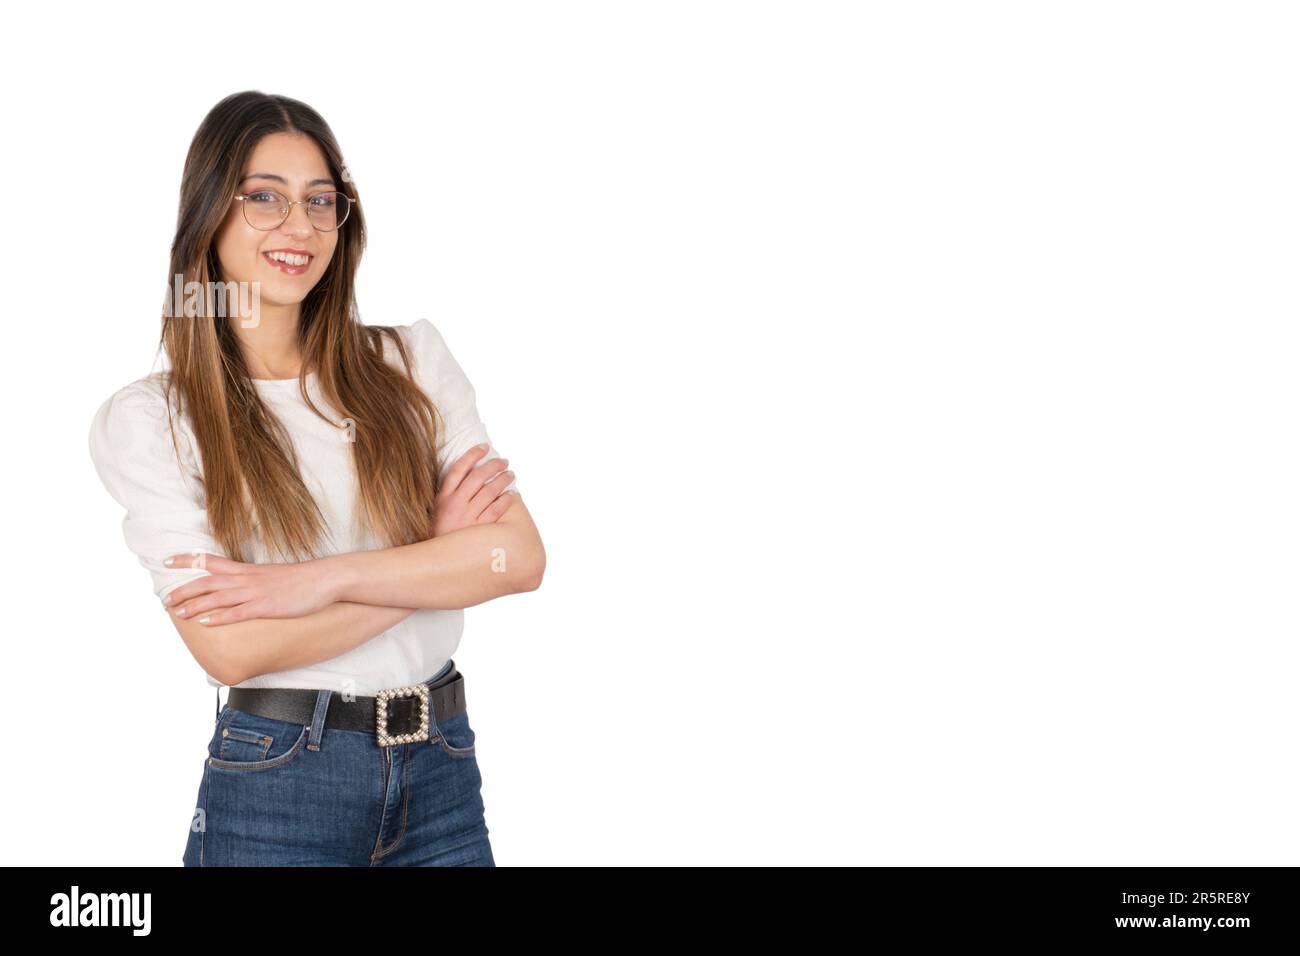 Confident woman, portrait of caucasian brunette confident woman. Lifestyle, emotions and casual young girl concept idea image. Smiling, arms crossed. Stock Photo